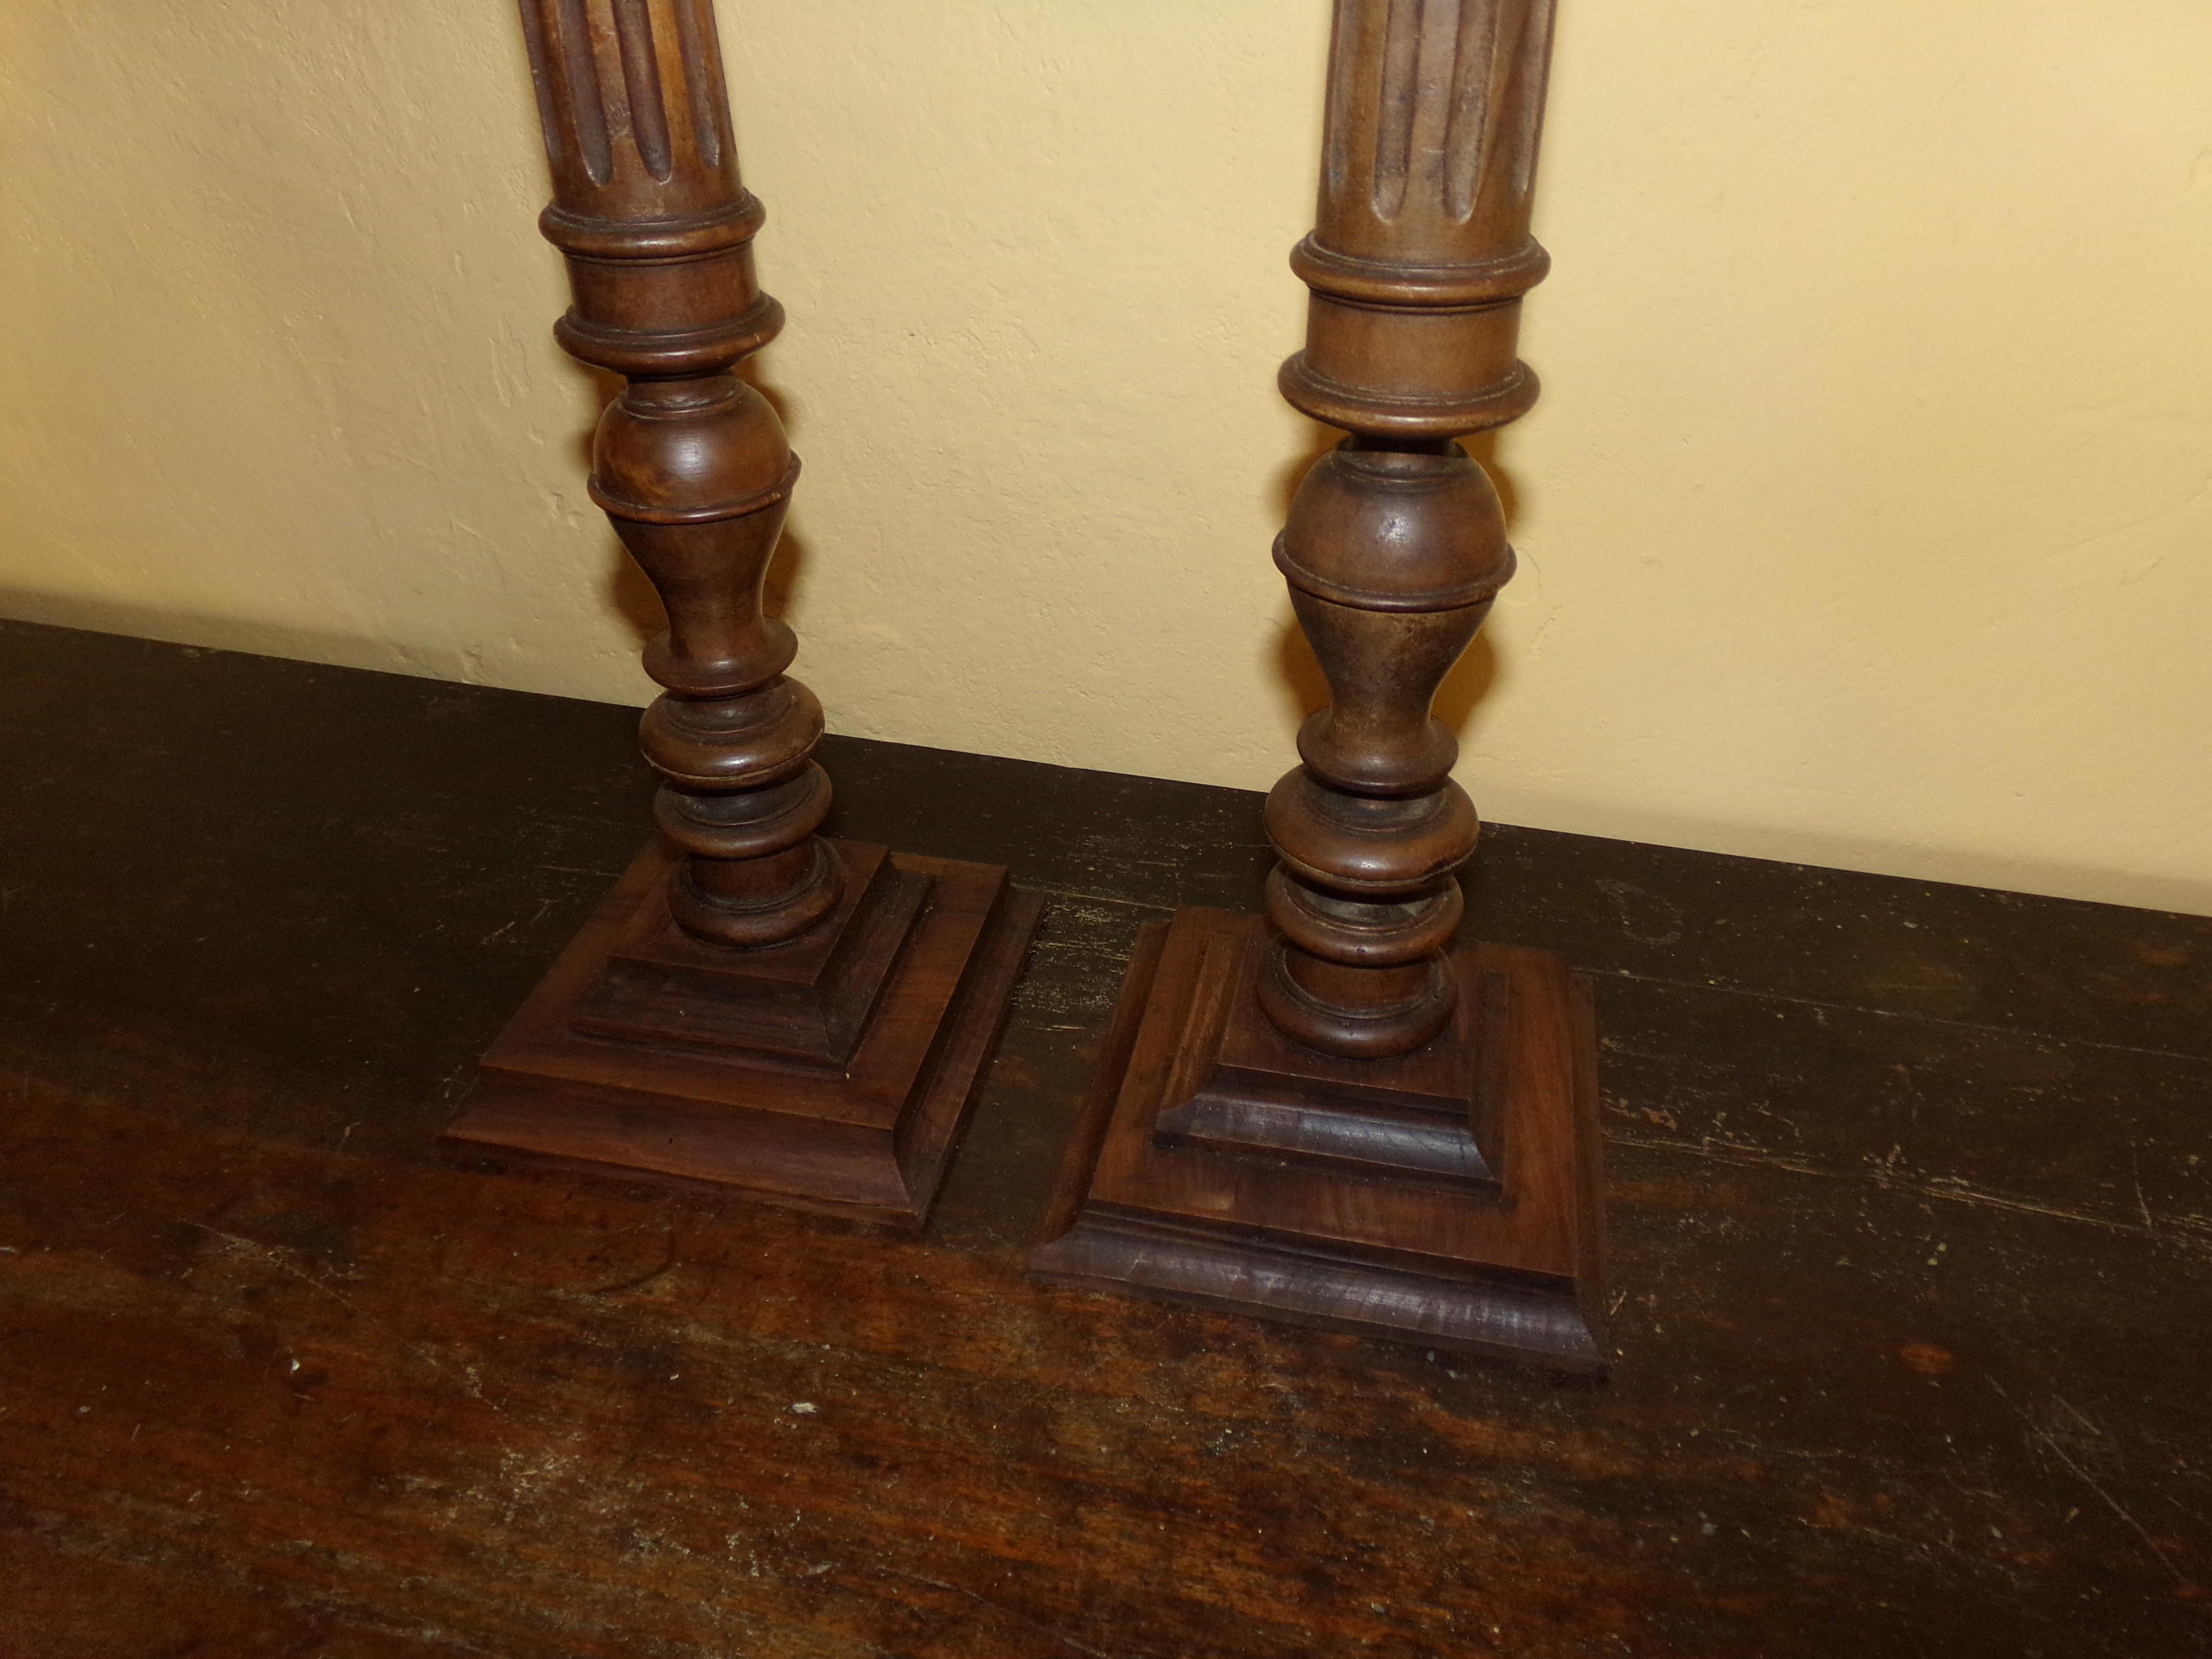 A super pair of turned, carved and fluted pricket walnut candlesticks in the Louis XVI style beautifully crafted from original circa 1890s wood turnings. Our craftsman has retained all the original patination. A beautiful holiday gift for all the